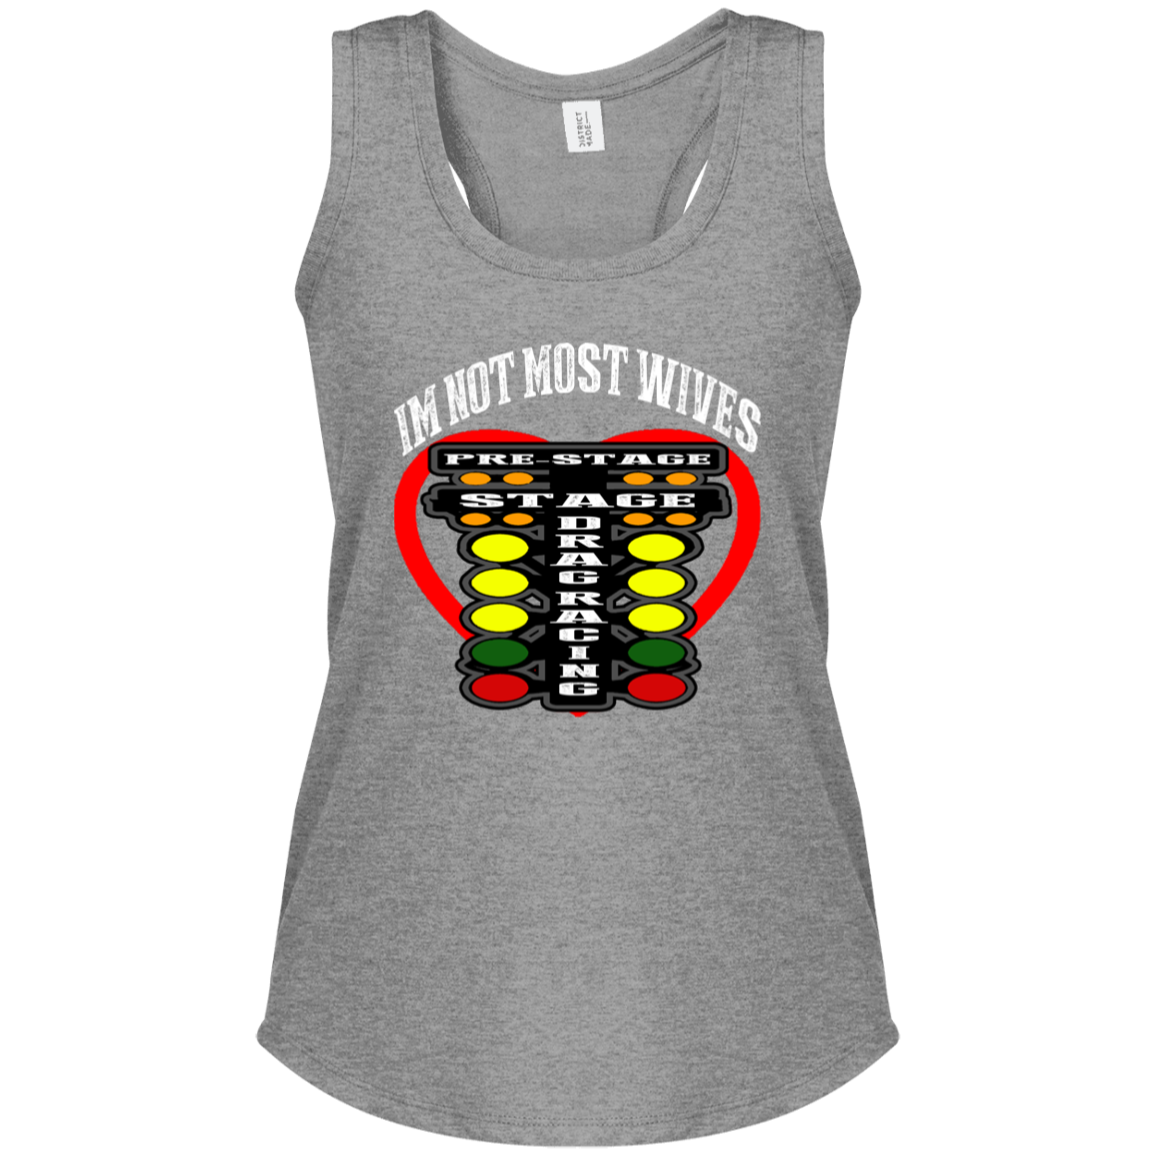 I'm Not Most Wives Drag Racing Women's Perfect Tri Racerback Tank